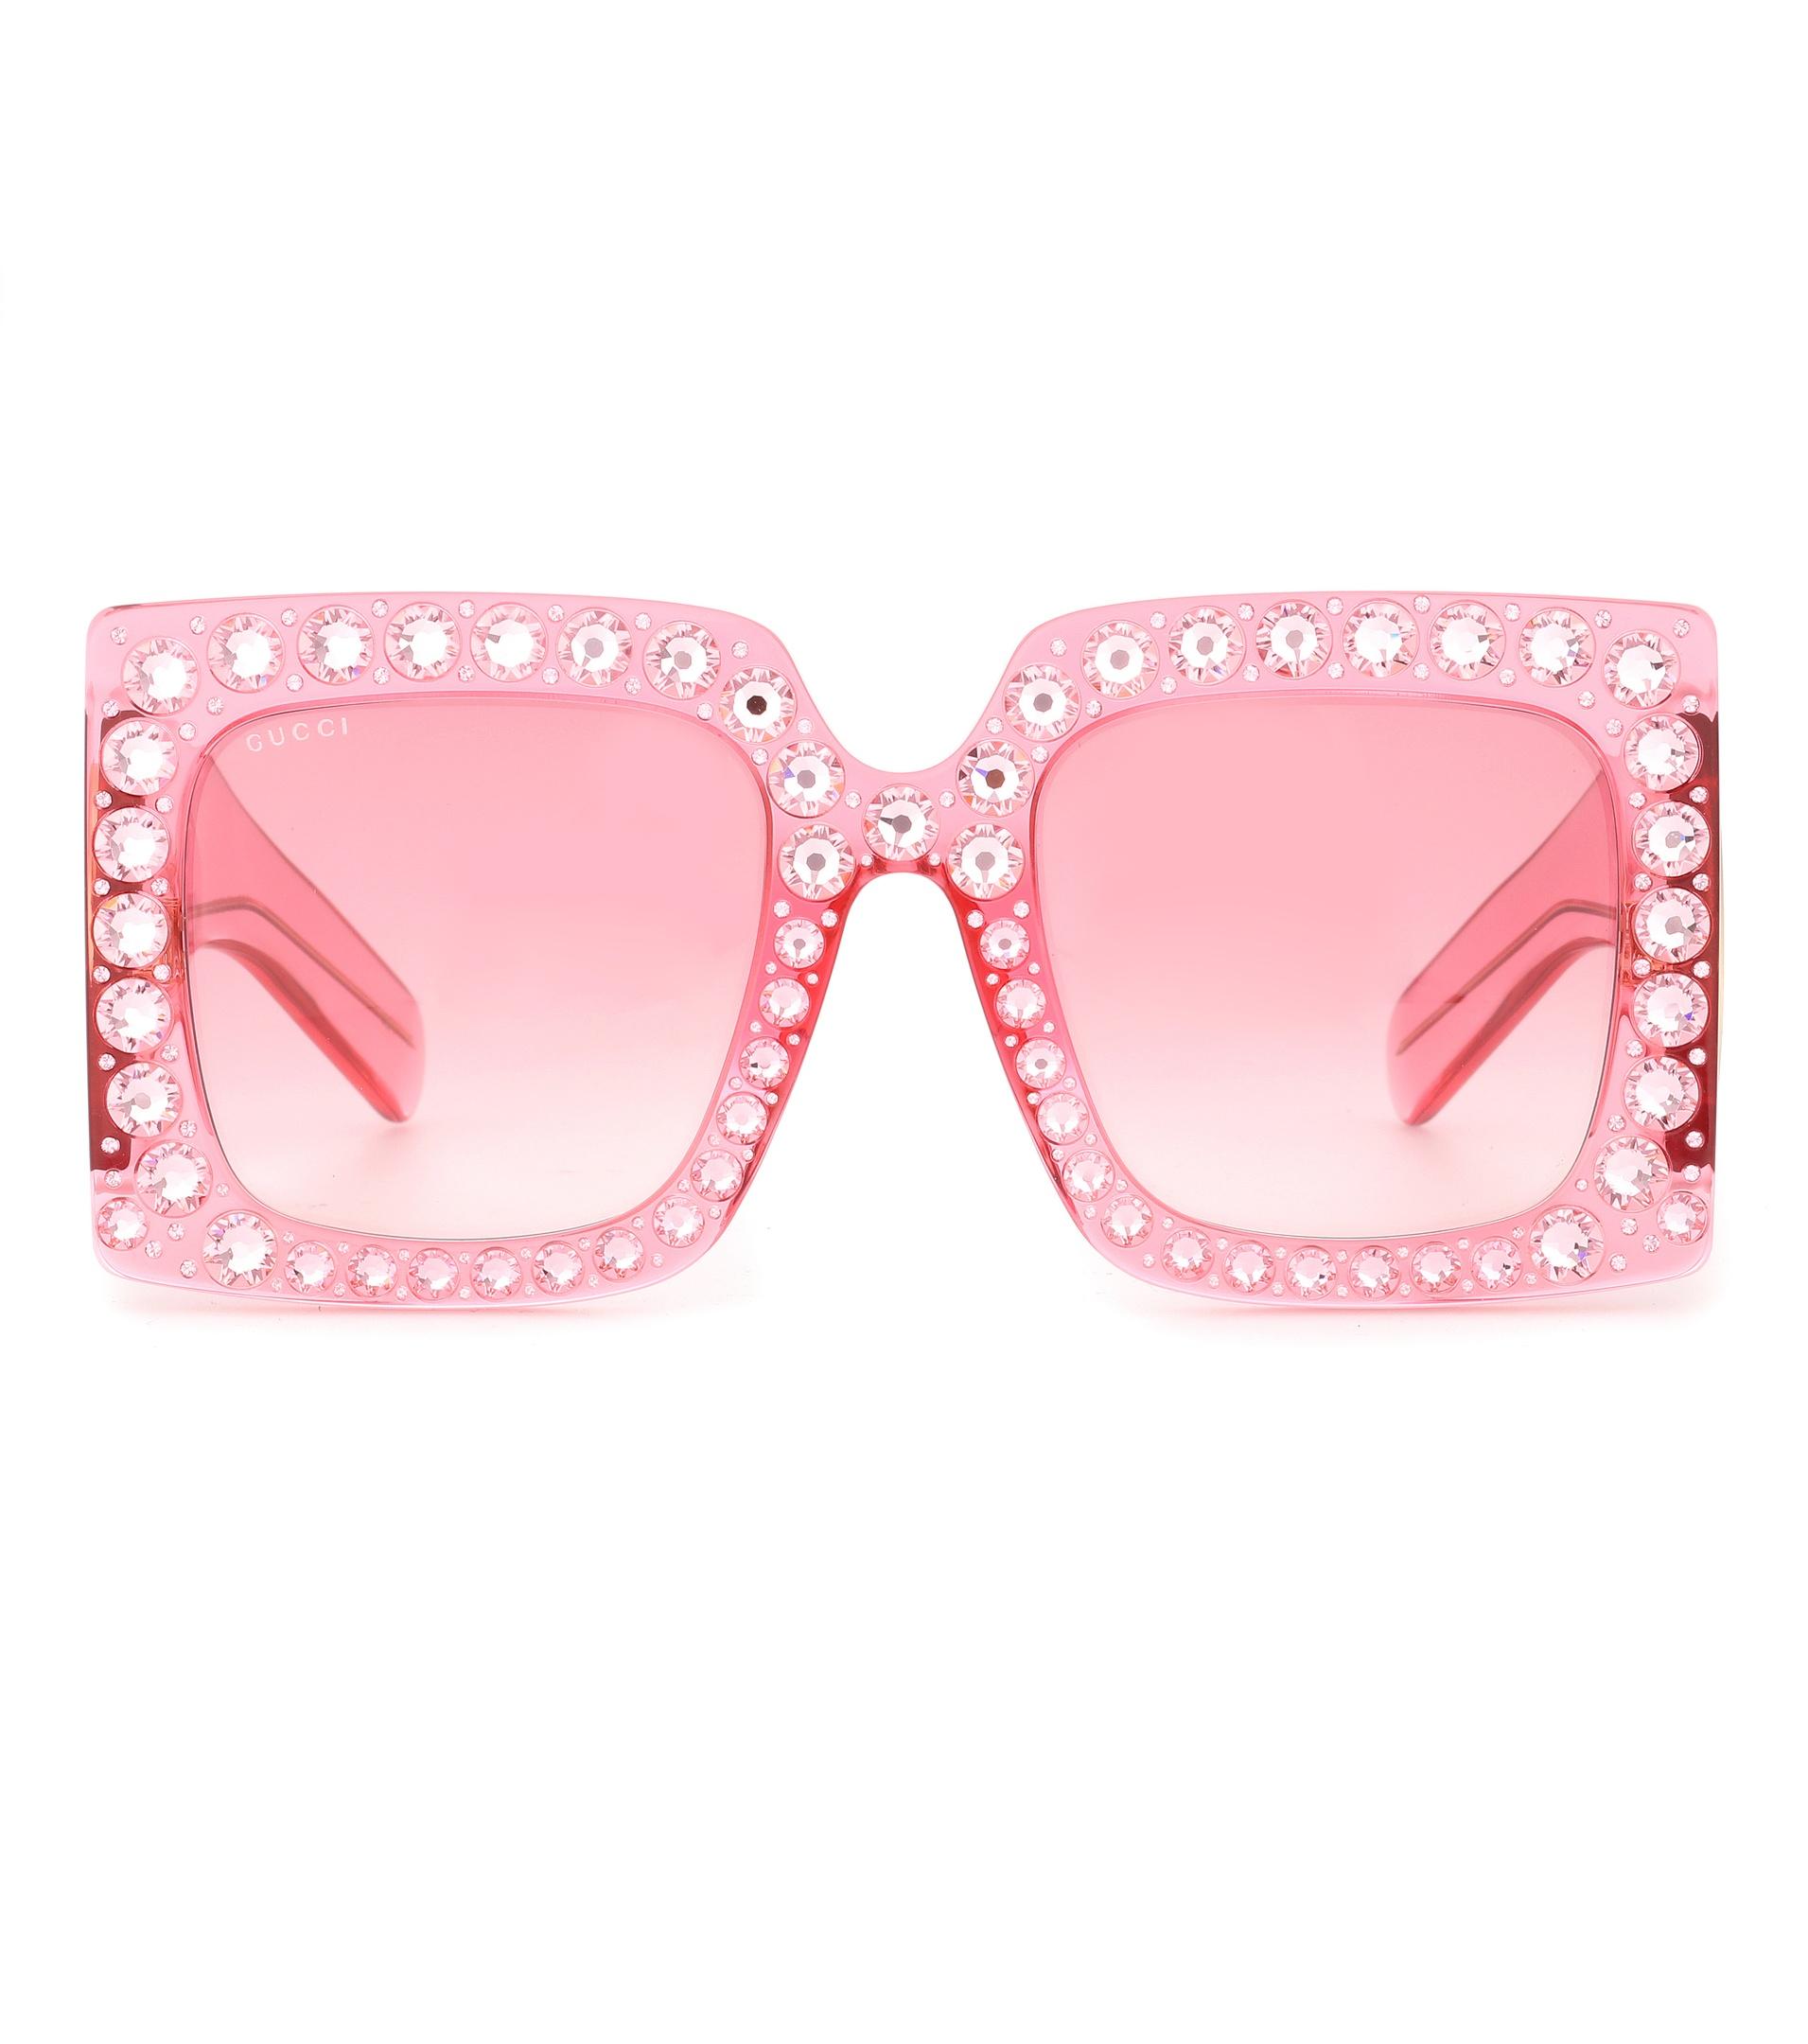 Lyst - Gucci Oversized Square Sunglasses in Pink